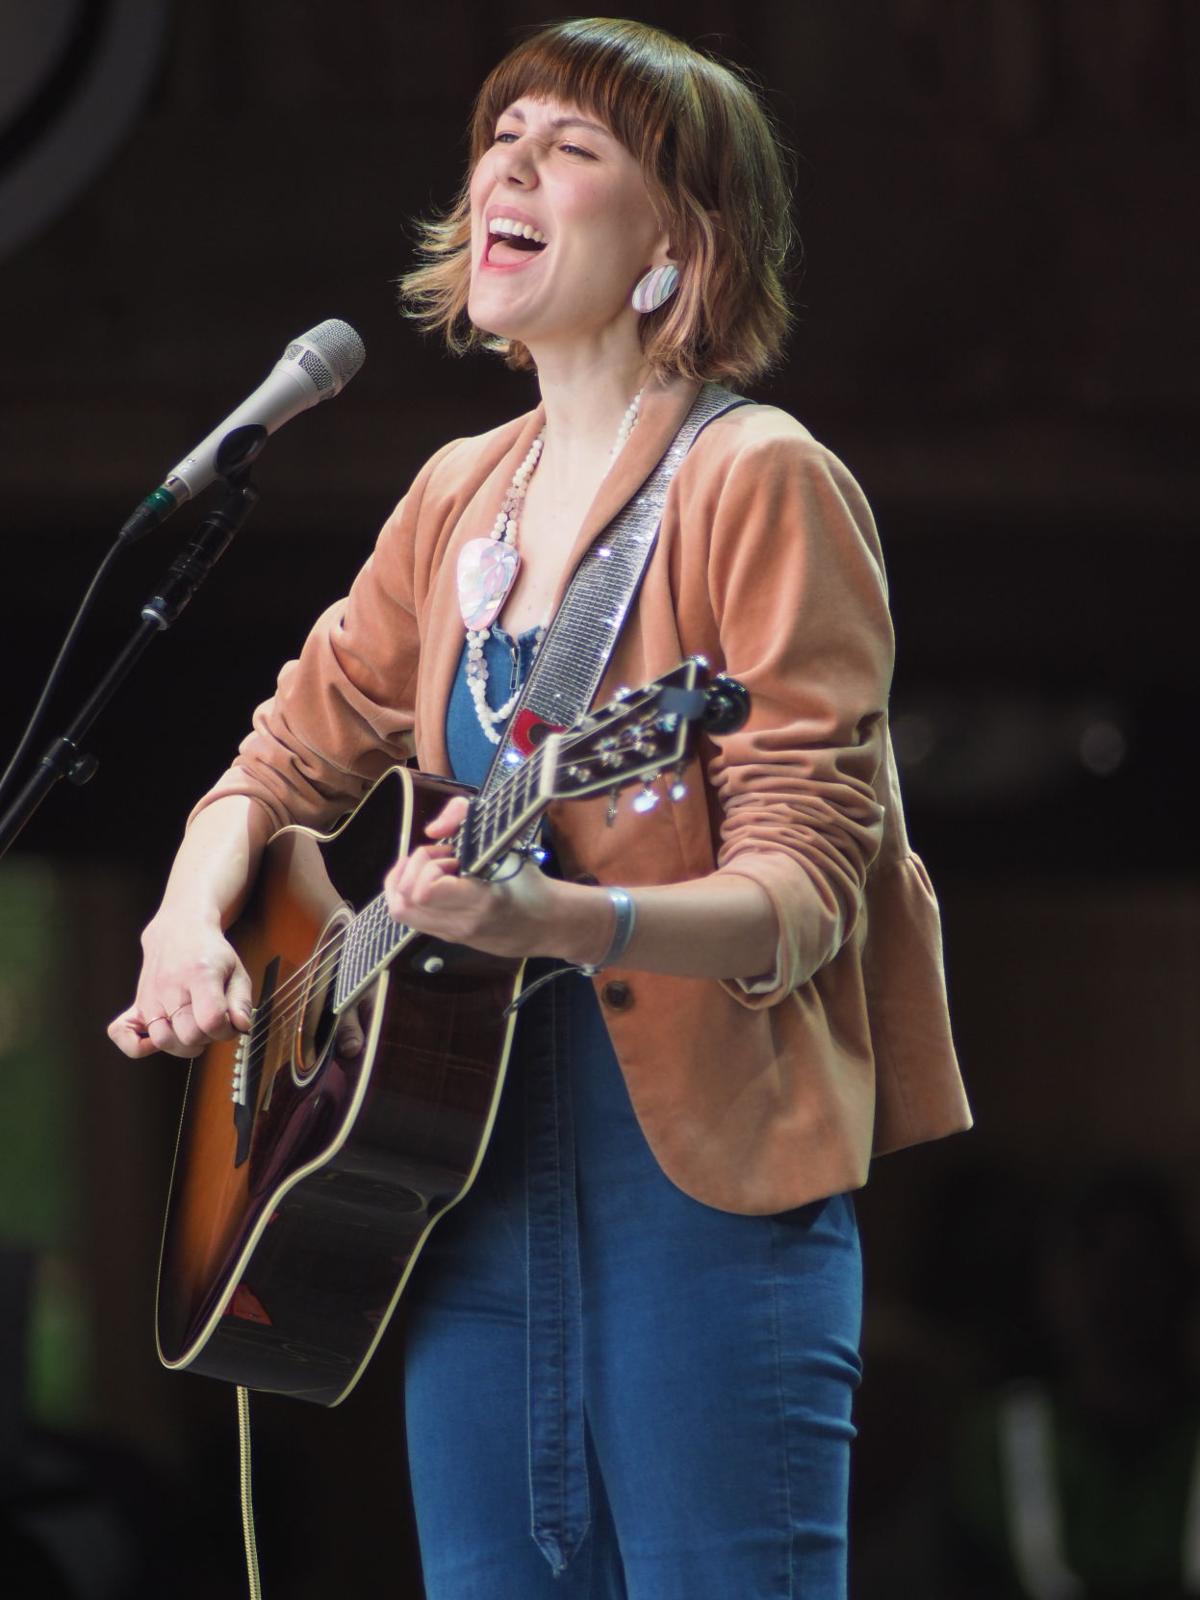 Saturday at the 2019 MerleFest Gallery